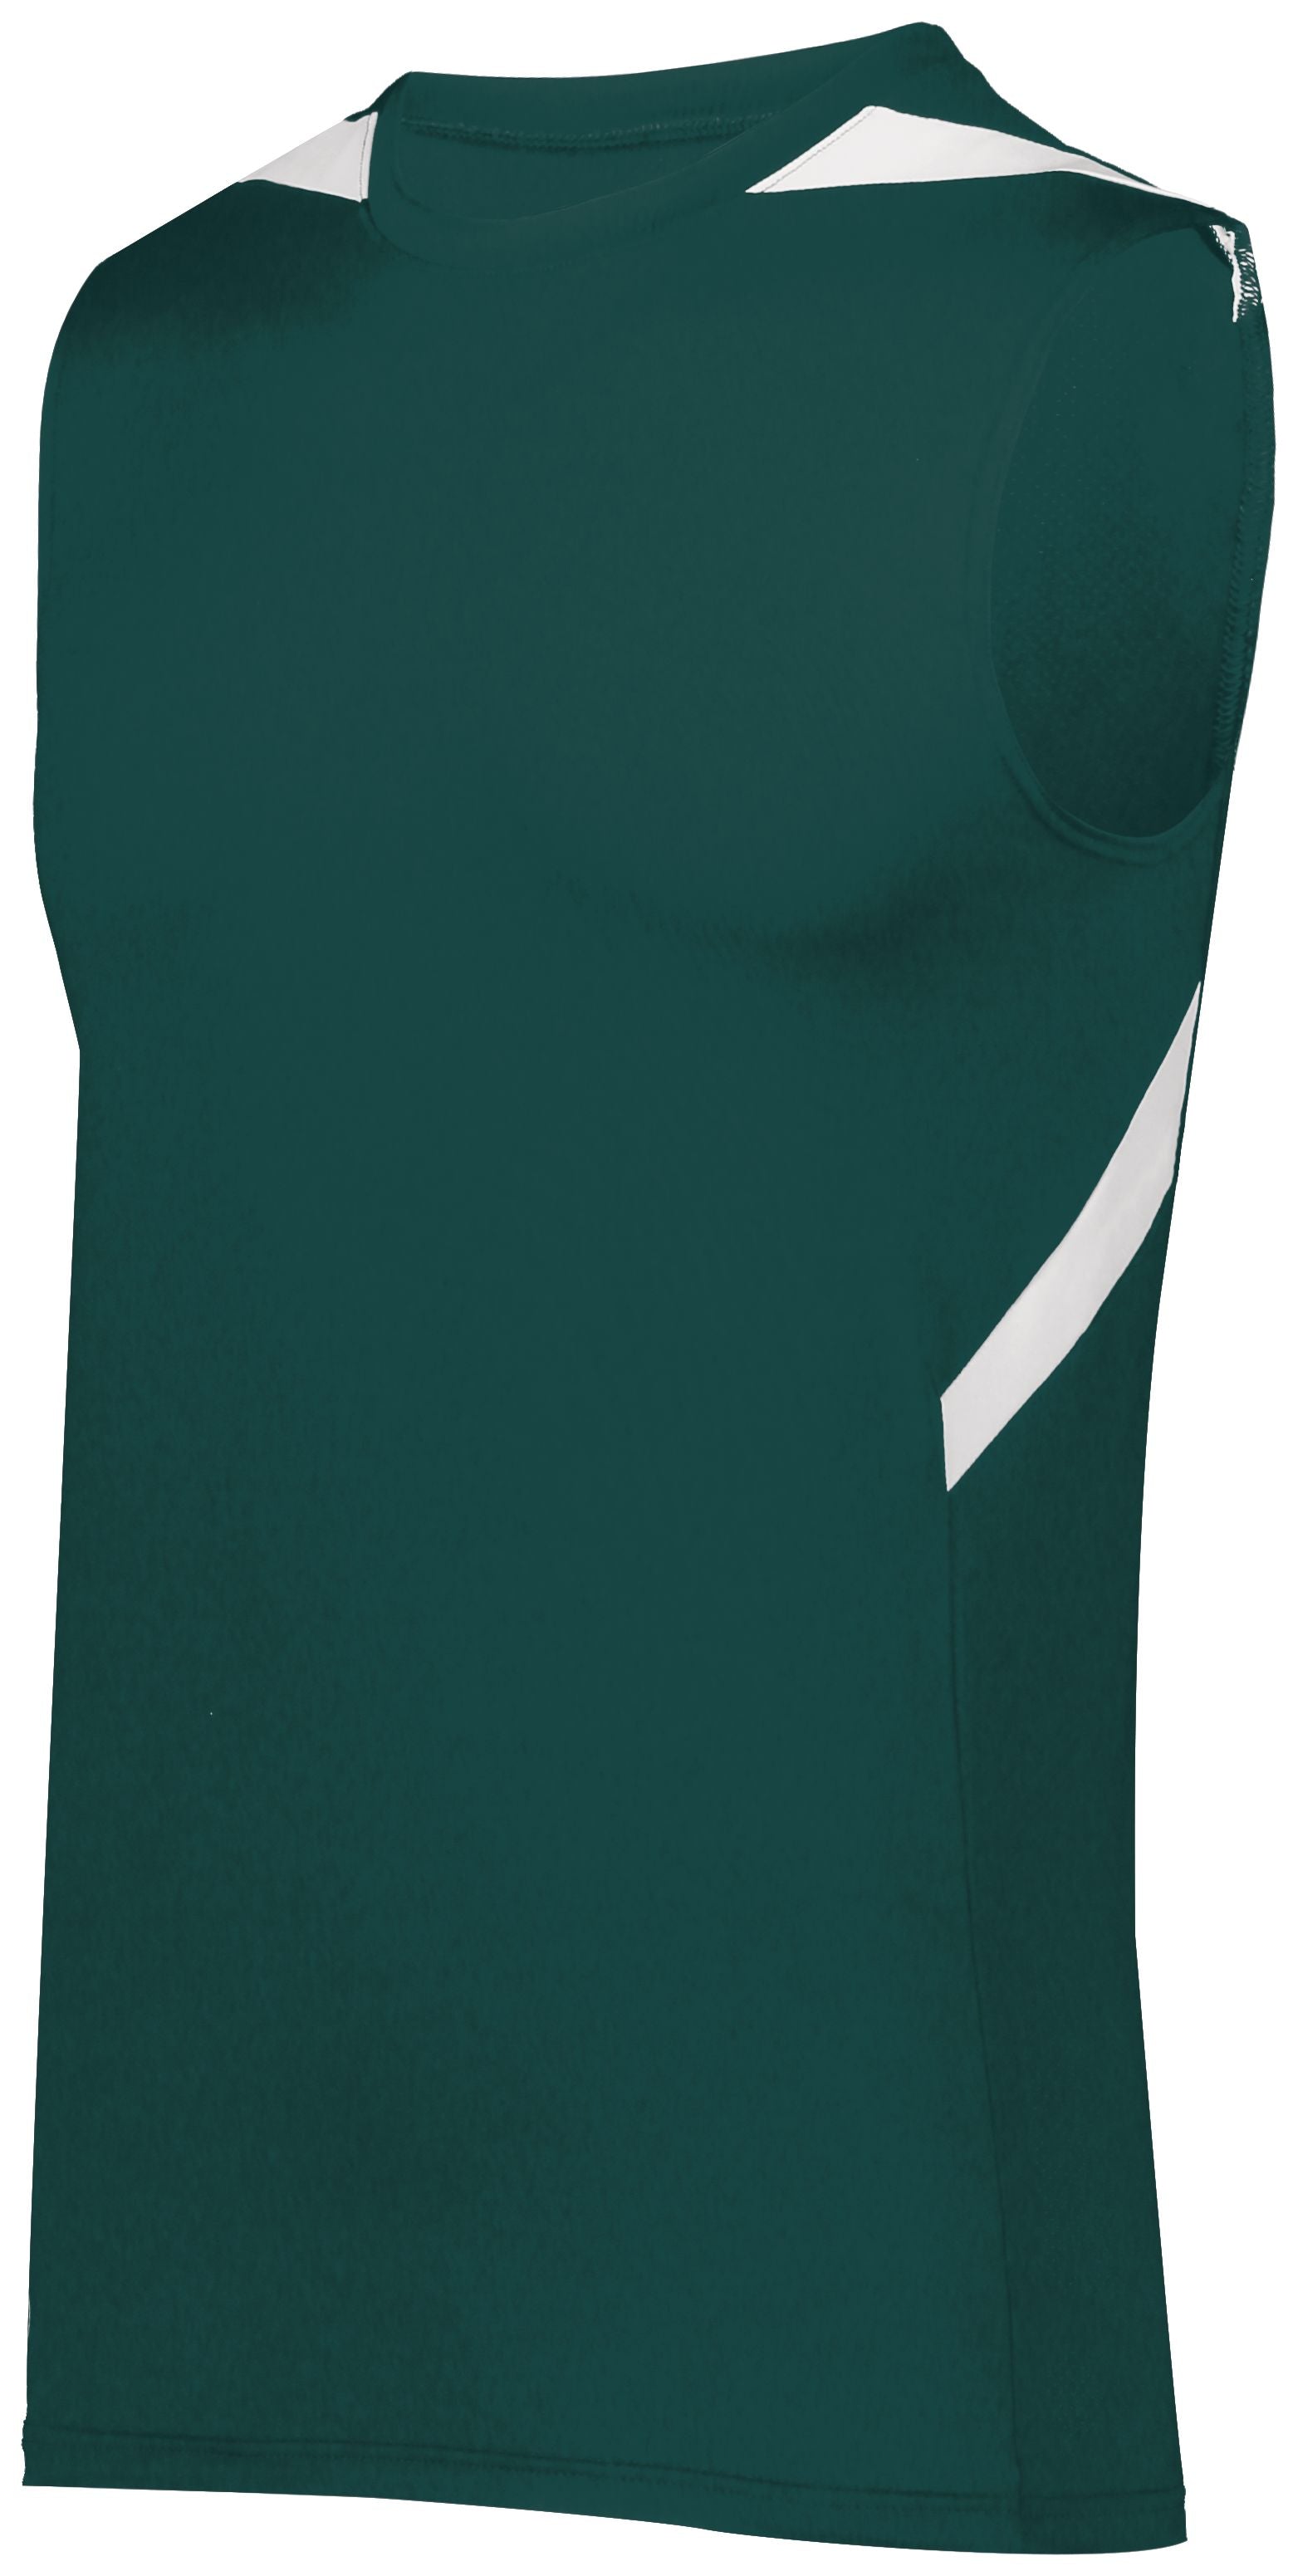 Holloway Pr Max Compression Jersey in Dark Green/White  -Part of the Adult, Adult-Jersey, Track-Field, Holloway, Shirts product lines at KanaleyCreations.com